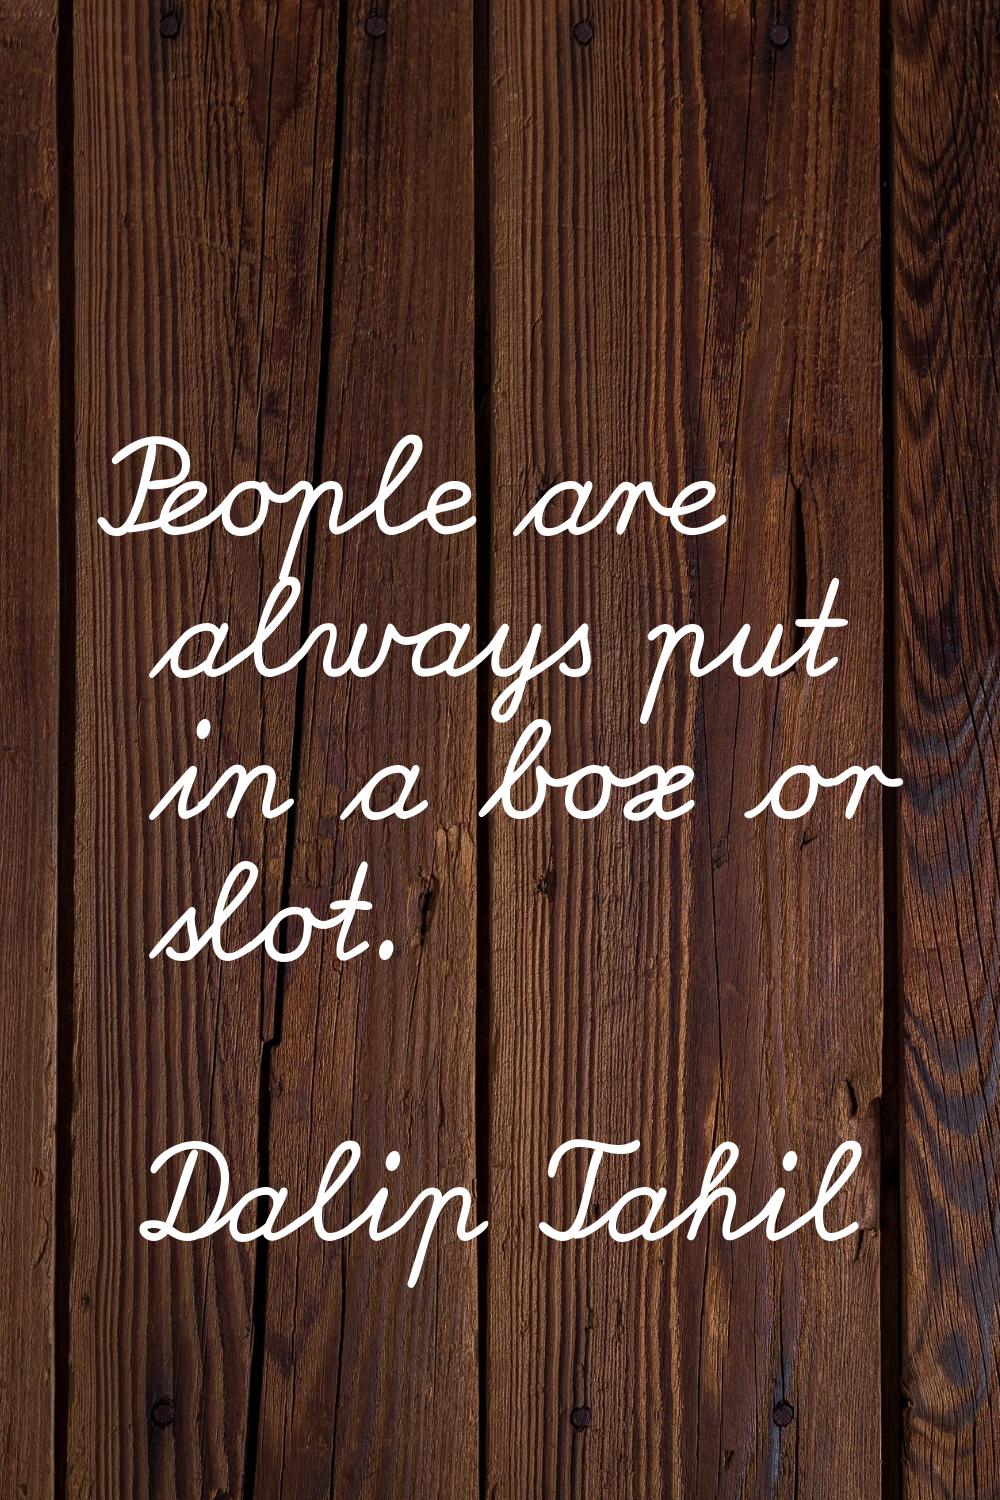 People are always put in a box or slot.